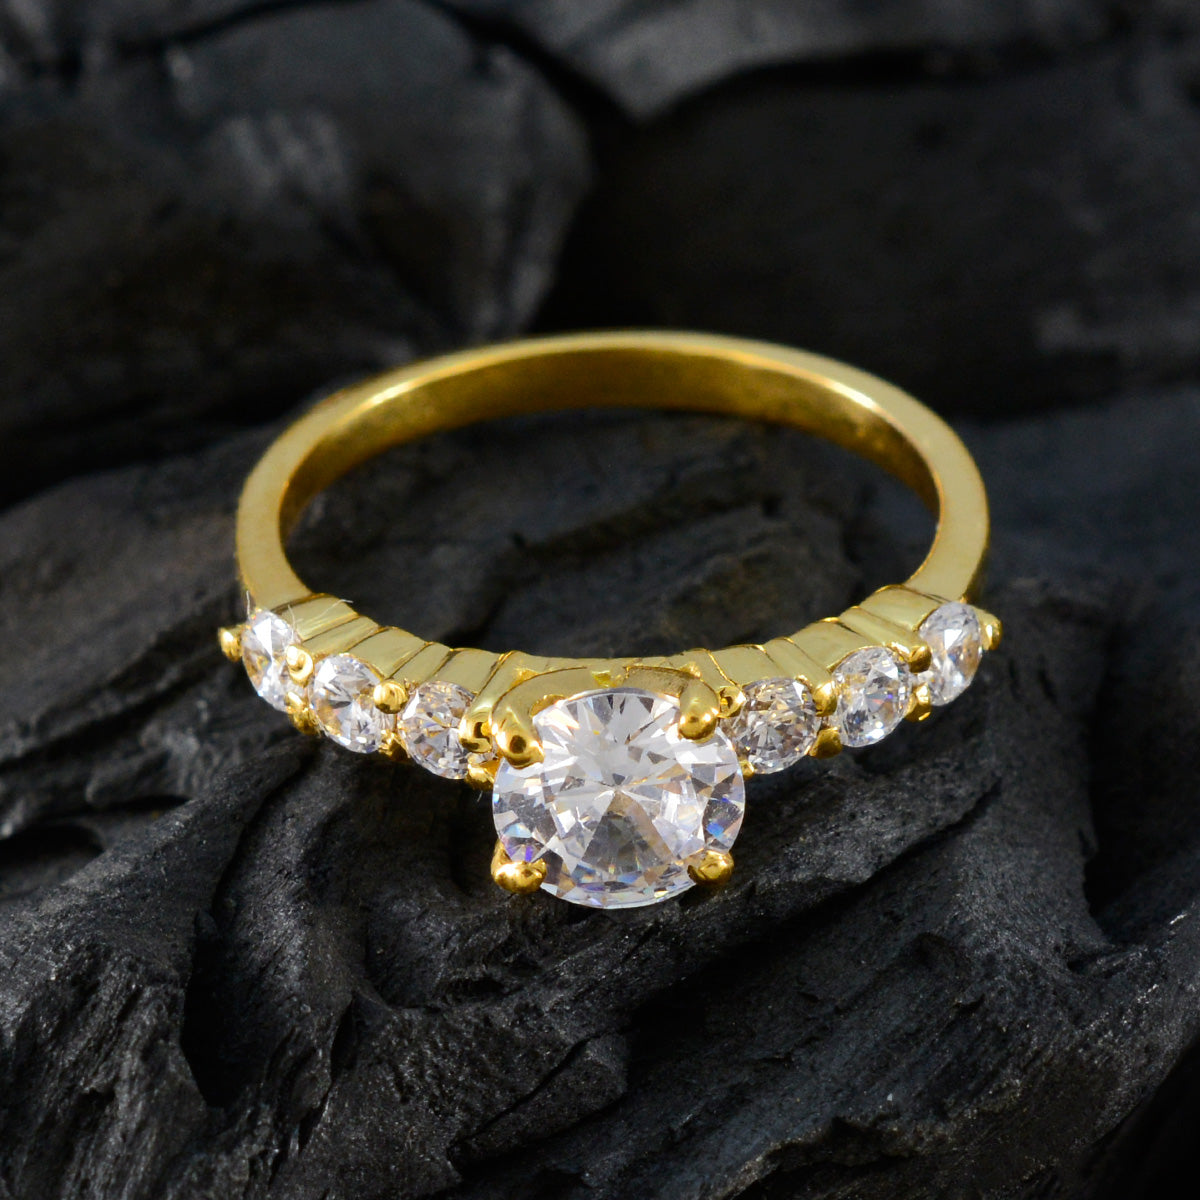 Riyo Prime Silver Ring With Yellow Gold Plating White CZ Stone Round Shape Prong Setting Ring